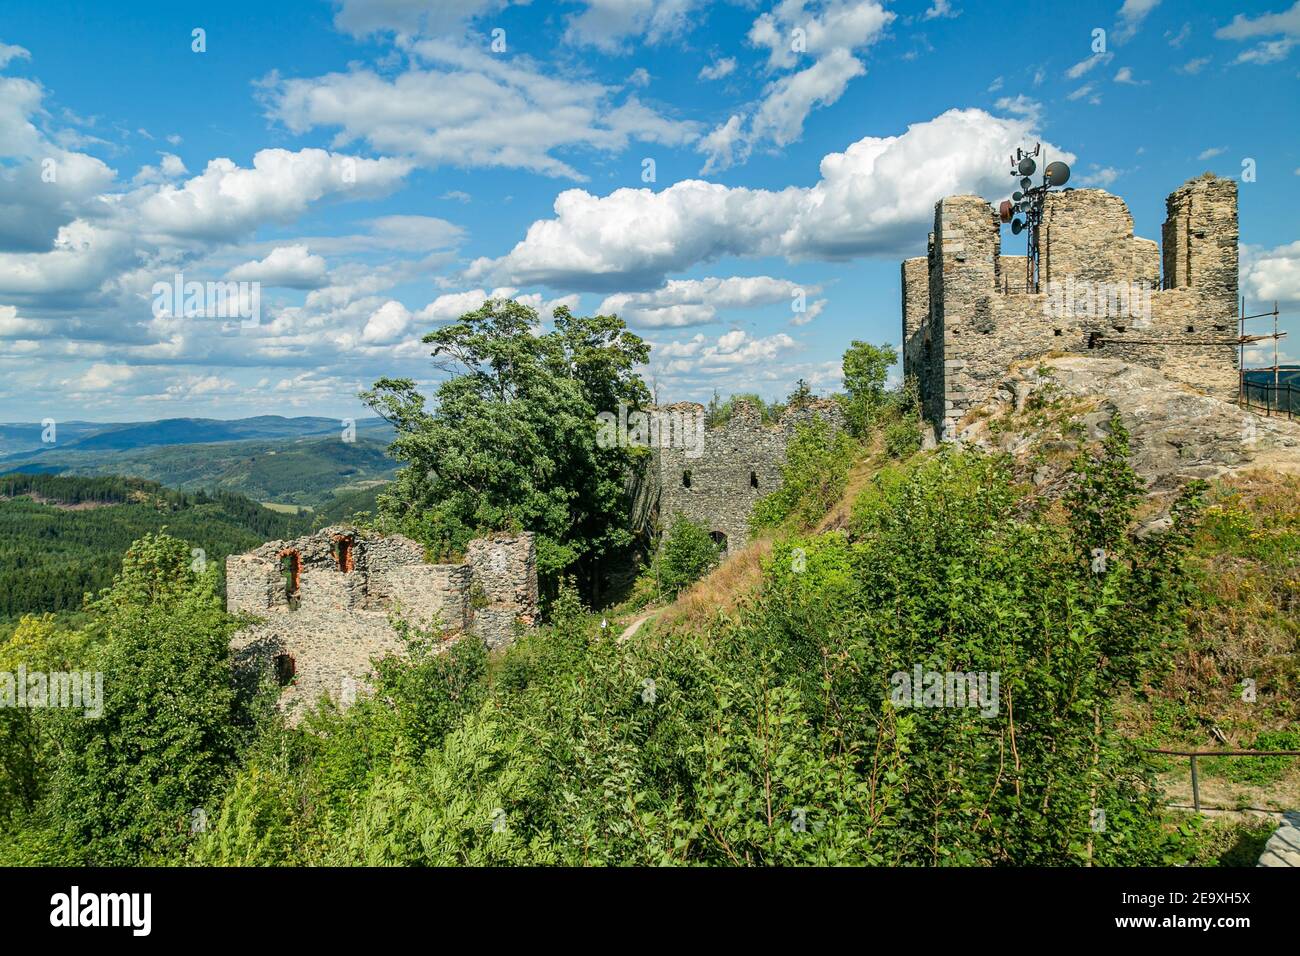 Andelska hora, Czech Republic - August 11 2018: Remains of the stone castle from 15th century standing on a hill with green trees, a scenic view. Stock Photo